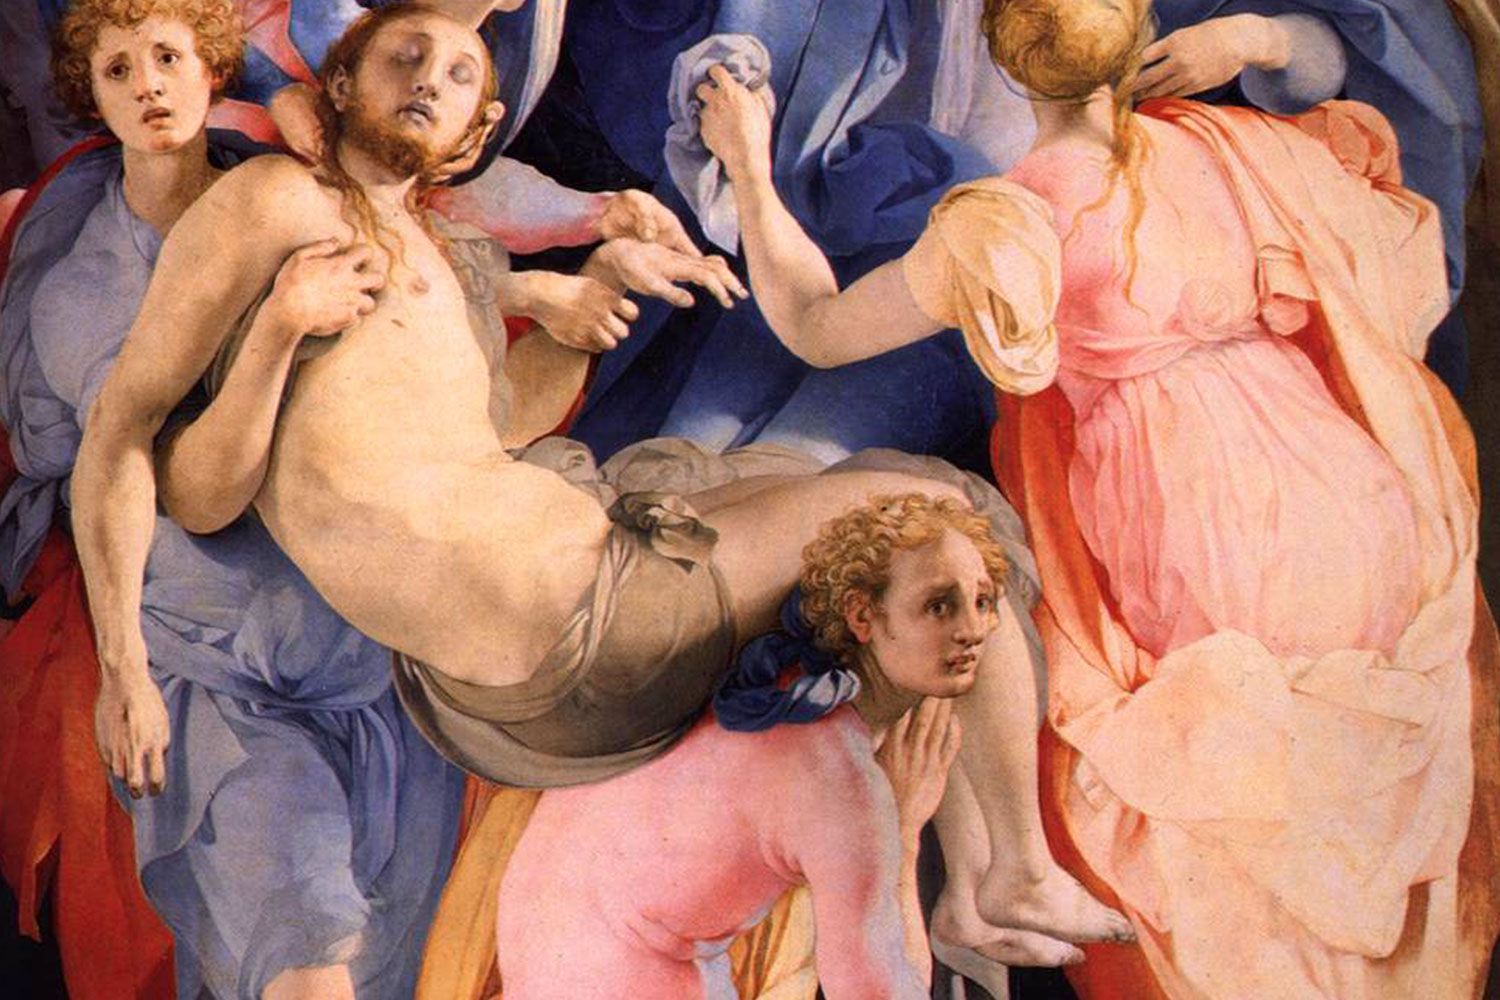 The Deposition by Pontormo in Florence